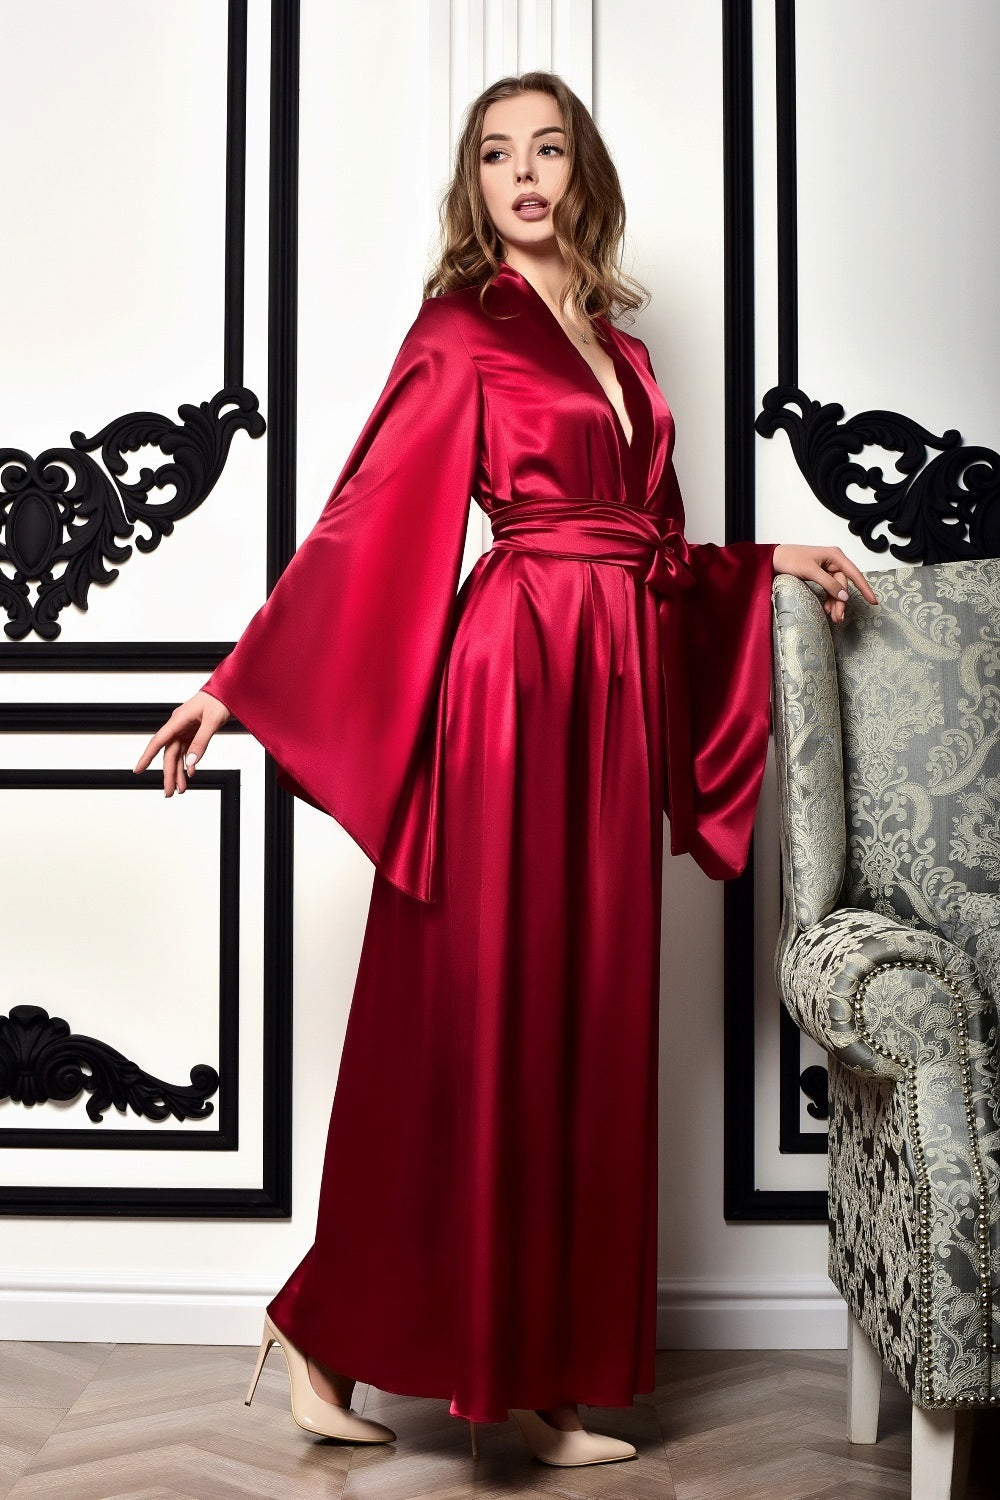 Burgundy robe adorned with delicate kimono motifs, a must-have for bridal party glam